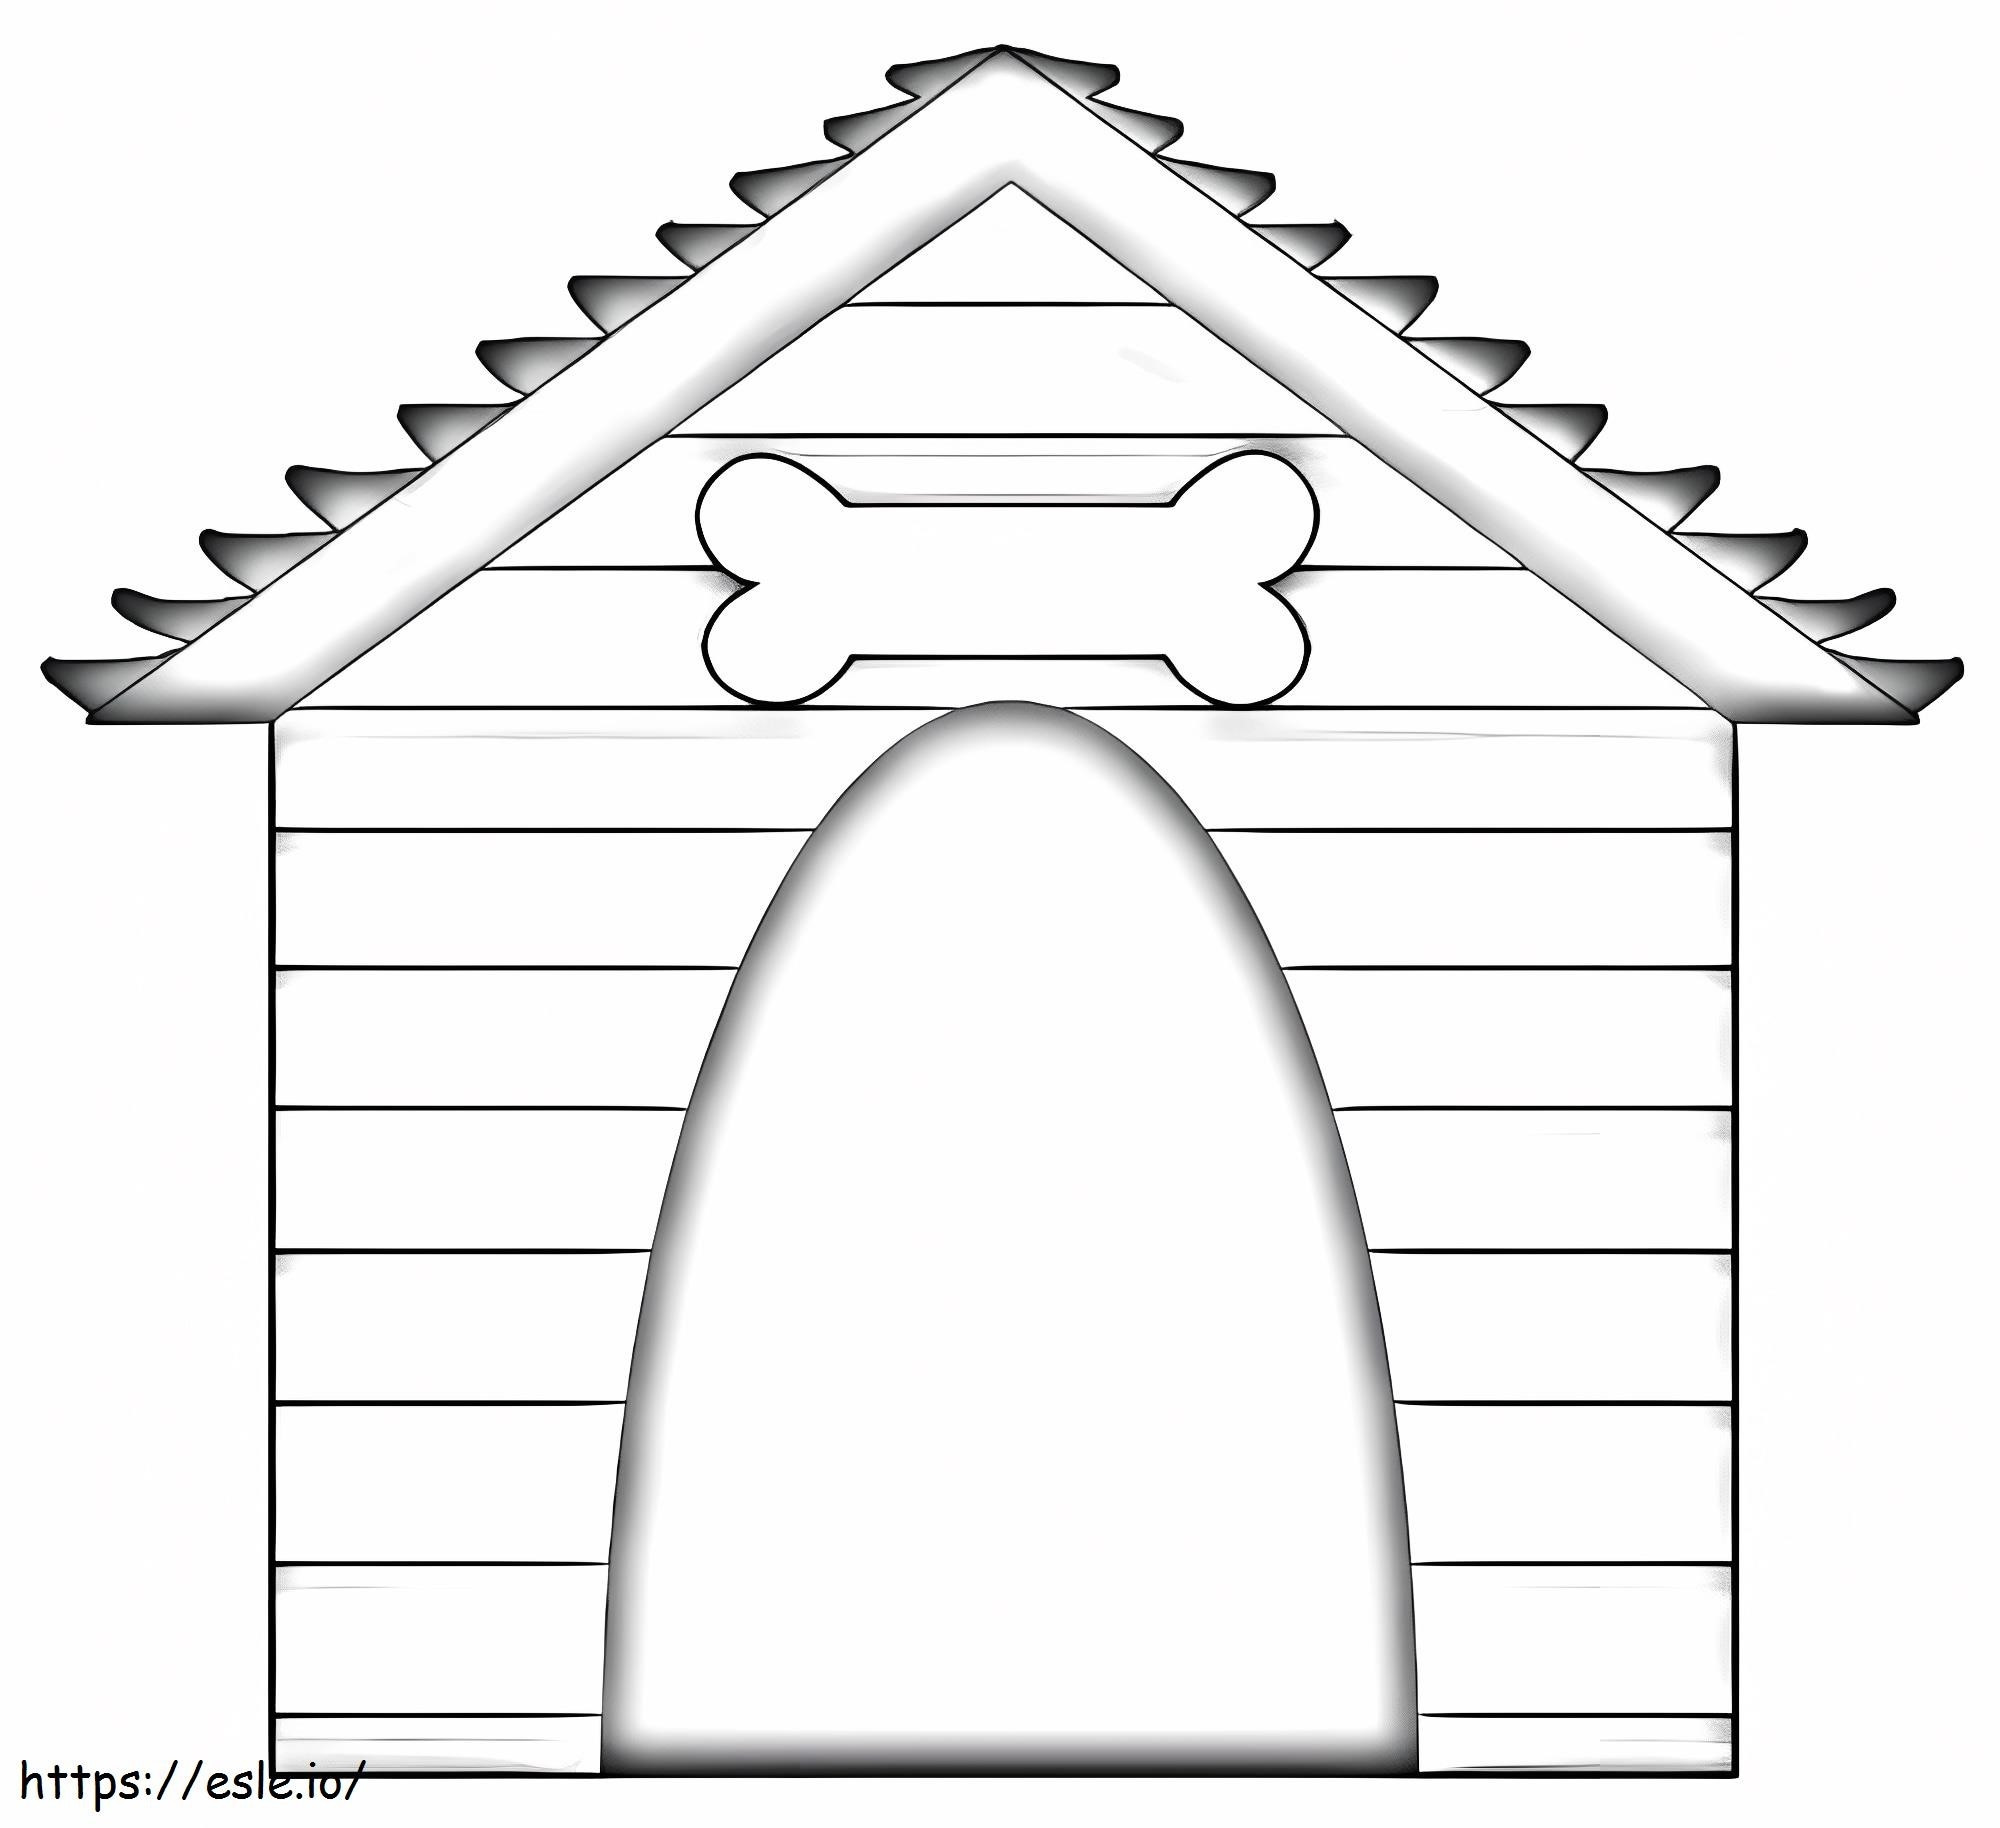 A Dog House coloring page